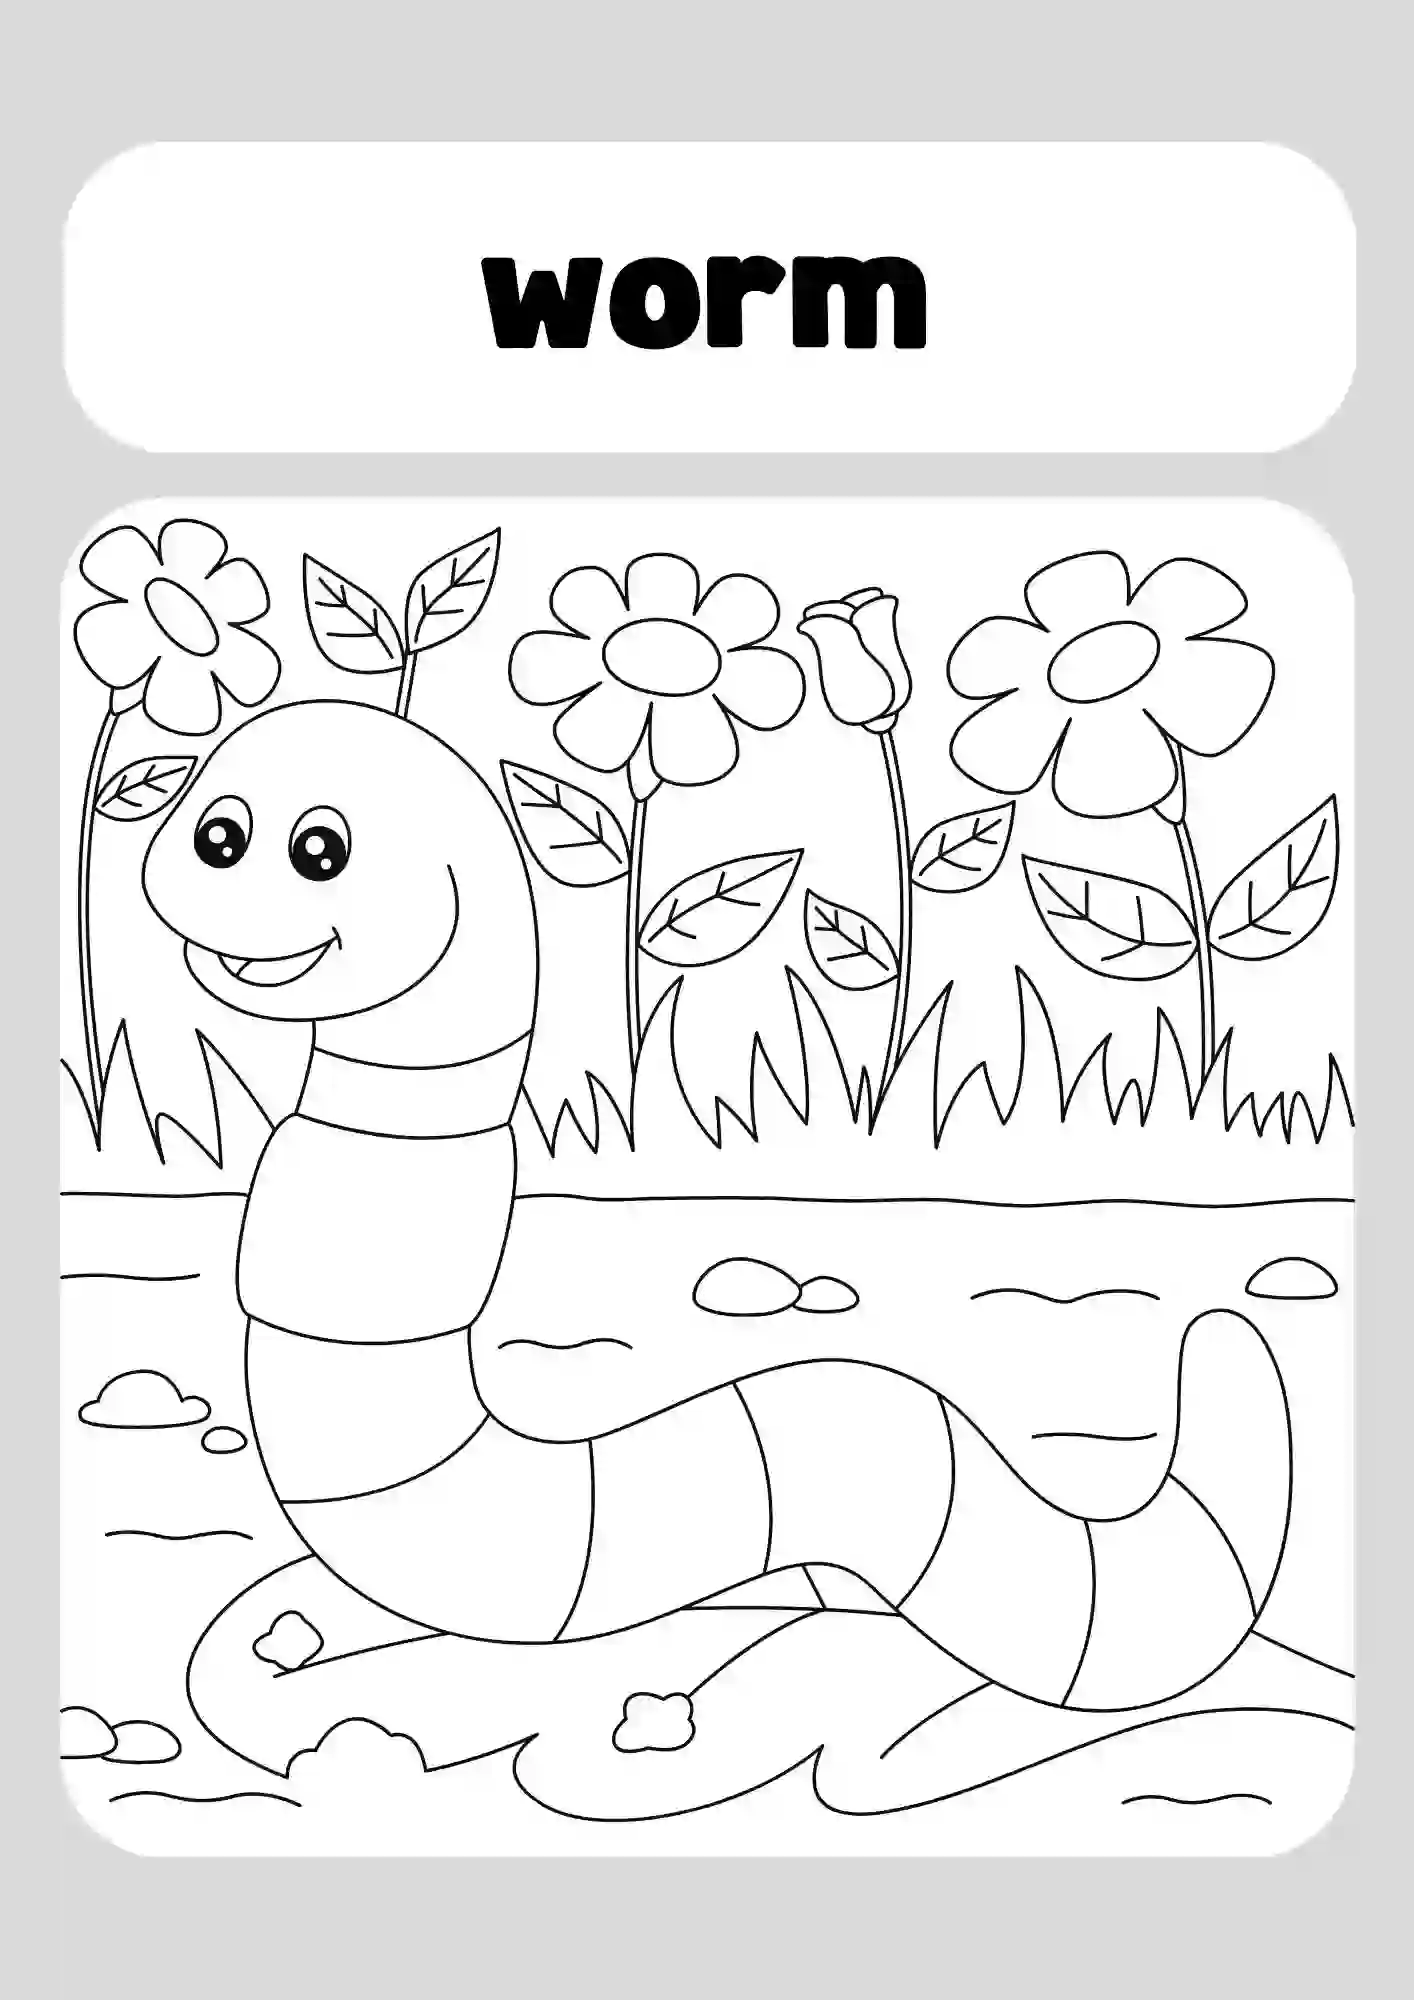 Insects Coloring Worksheets for Kindergarten (worm)